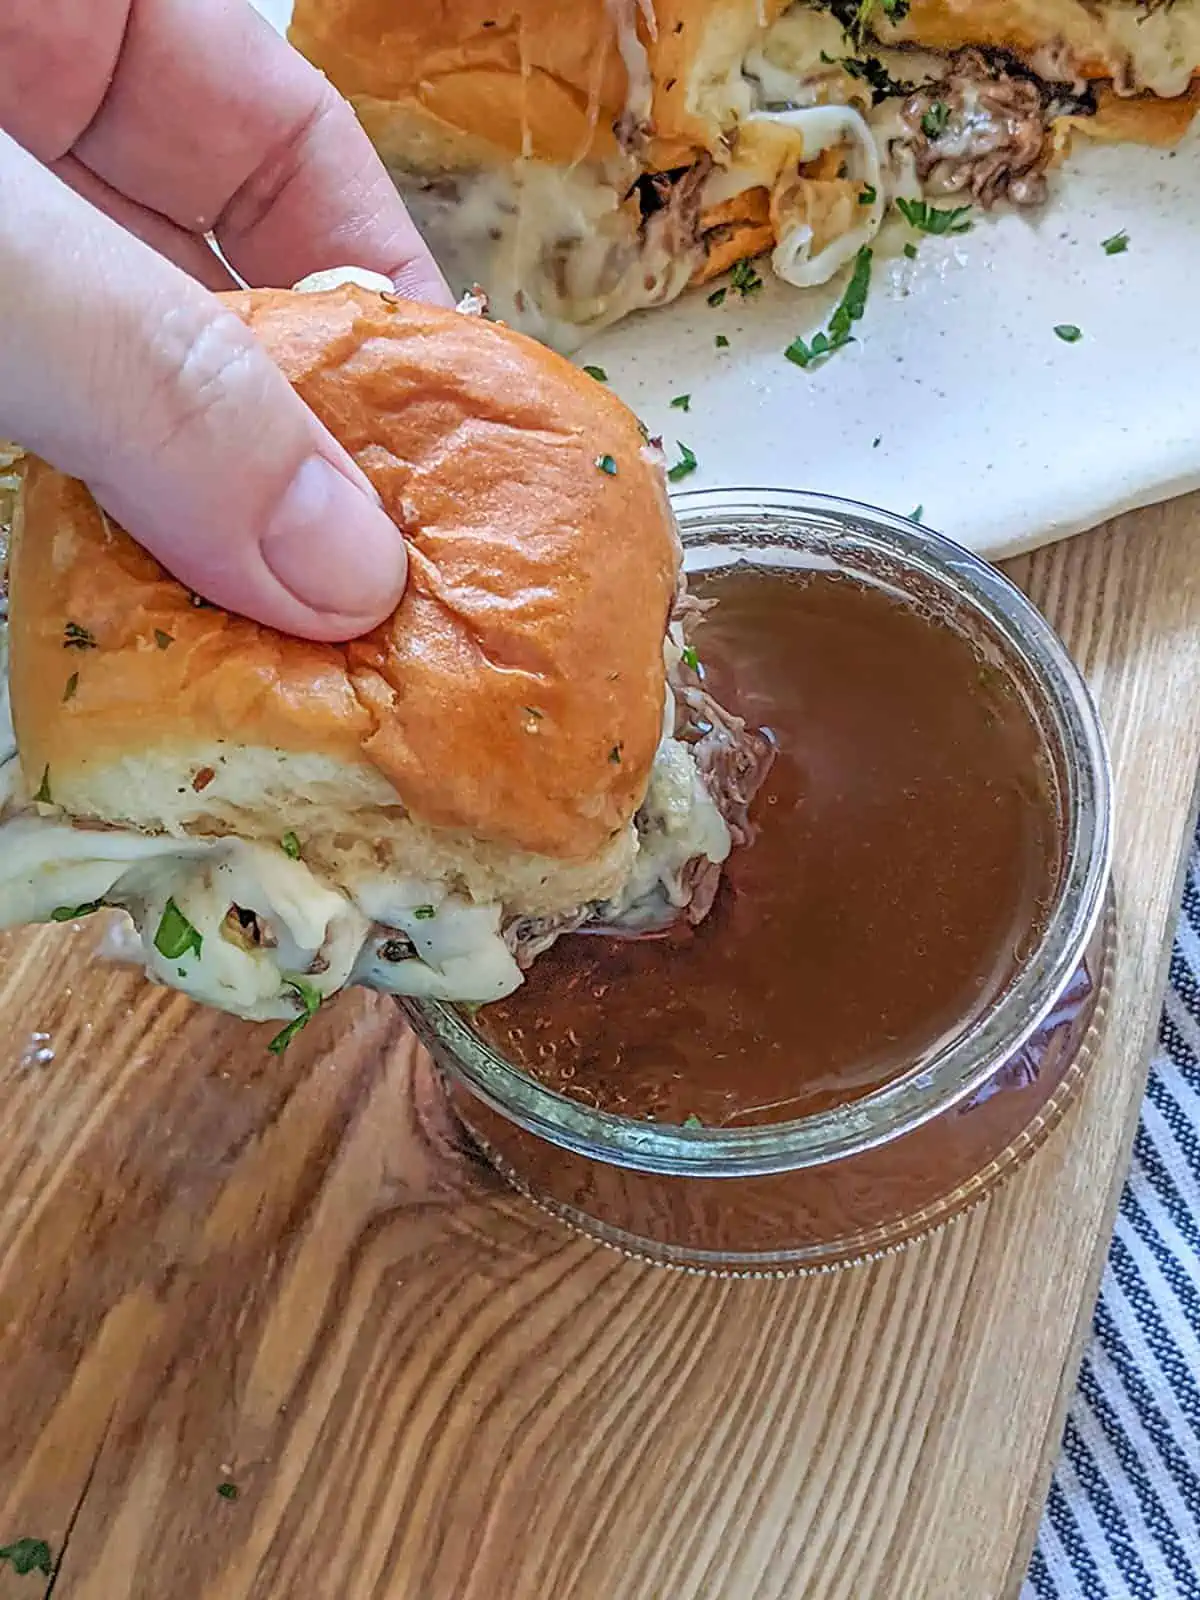 A roast beef slider with melted cheese being dunked into some au jus sauce.